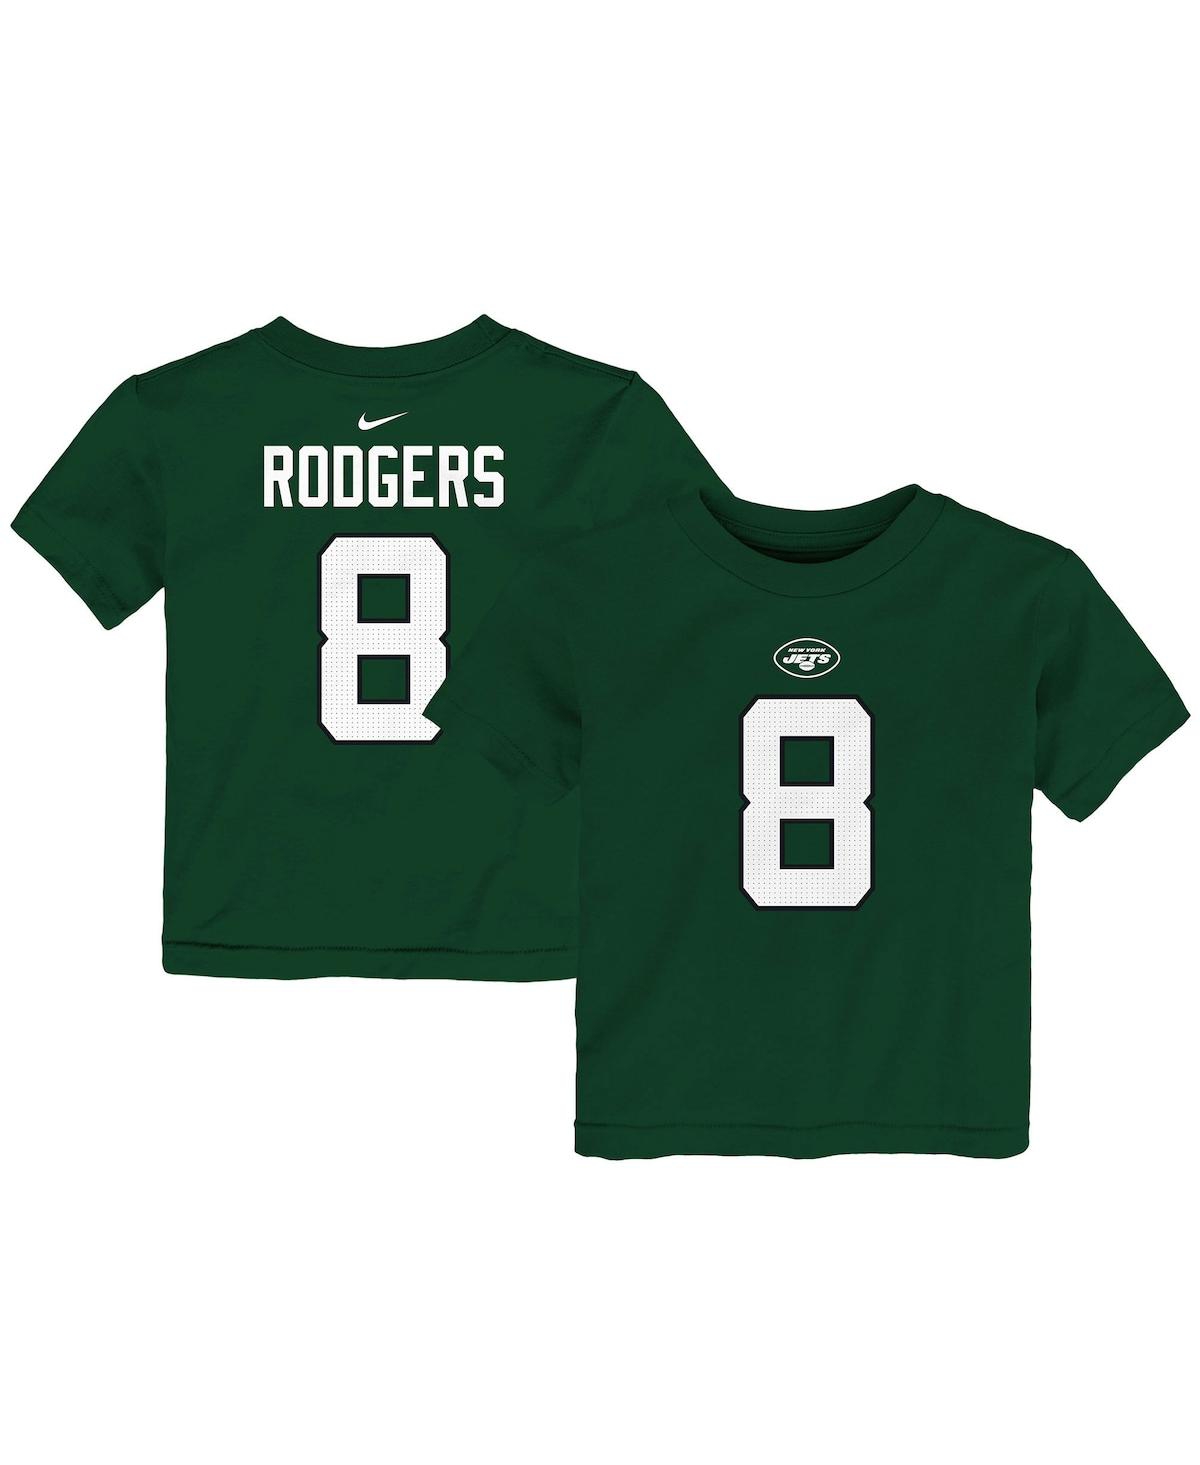 Shop Nike Toddler Boys And Girls  Aaron Rodgers Green New York Jets Player Name And Number T-shirt